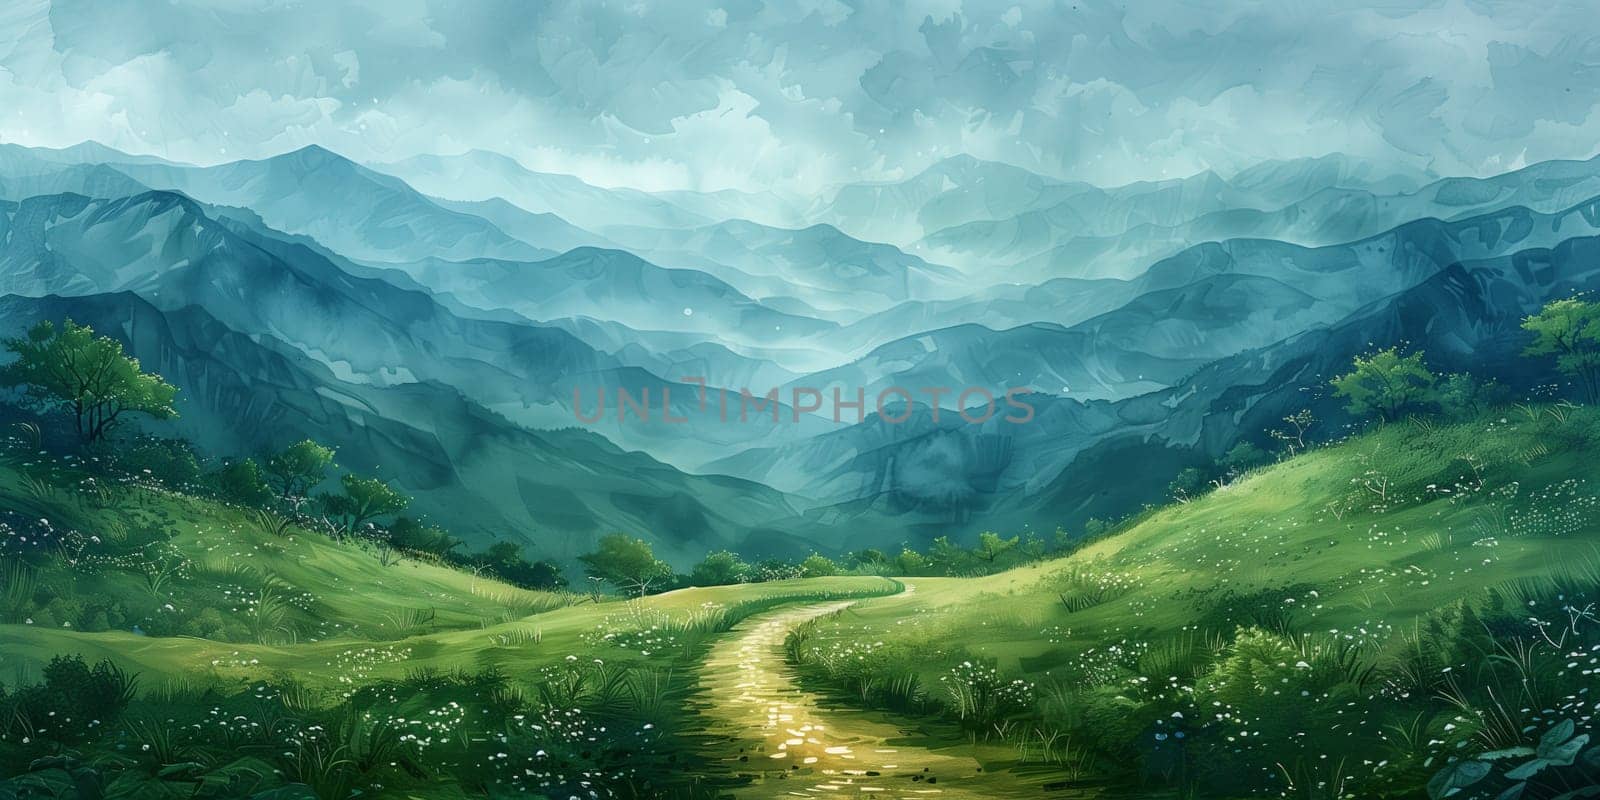 A picturesque natural landscape painting featuring a winding path through a lush green valley with majestic mountains in the background under a clear blue sky filled with white clouds